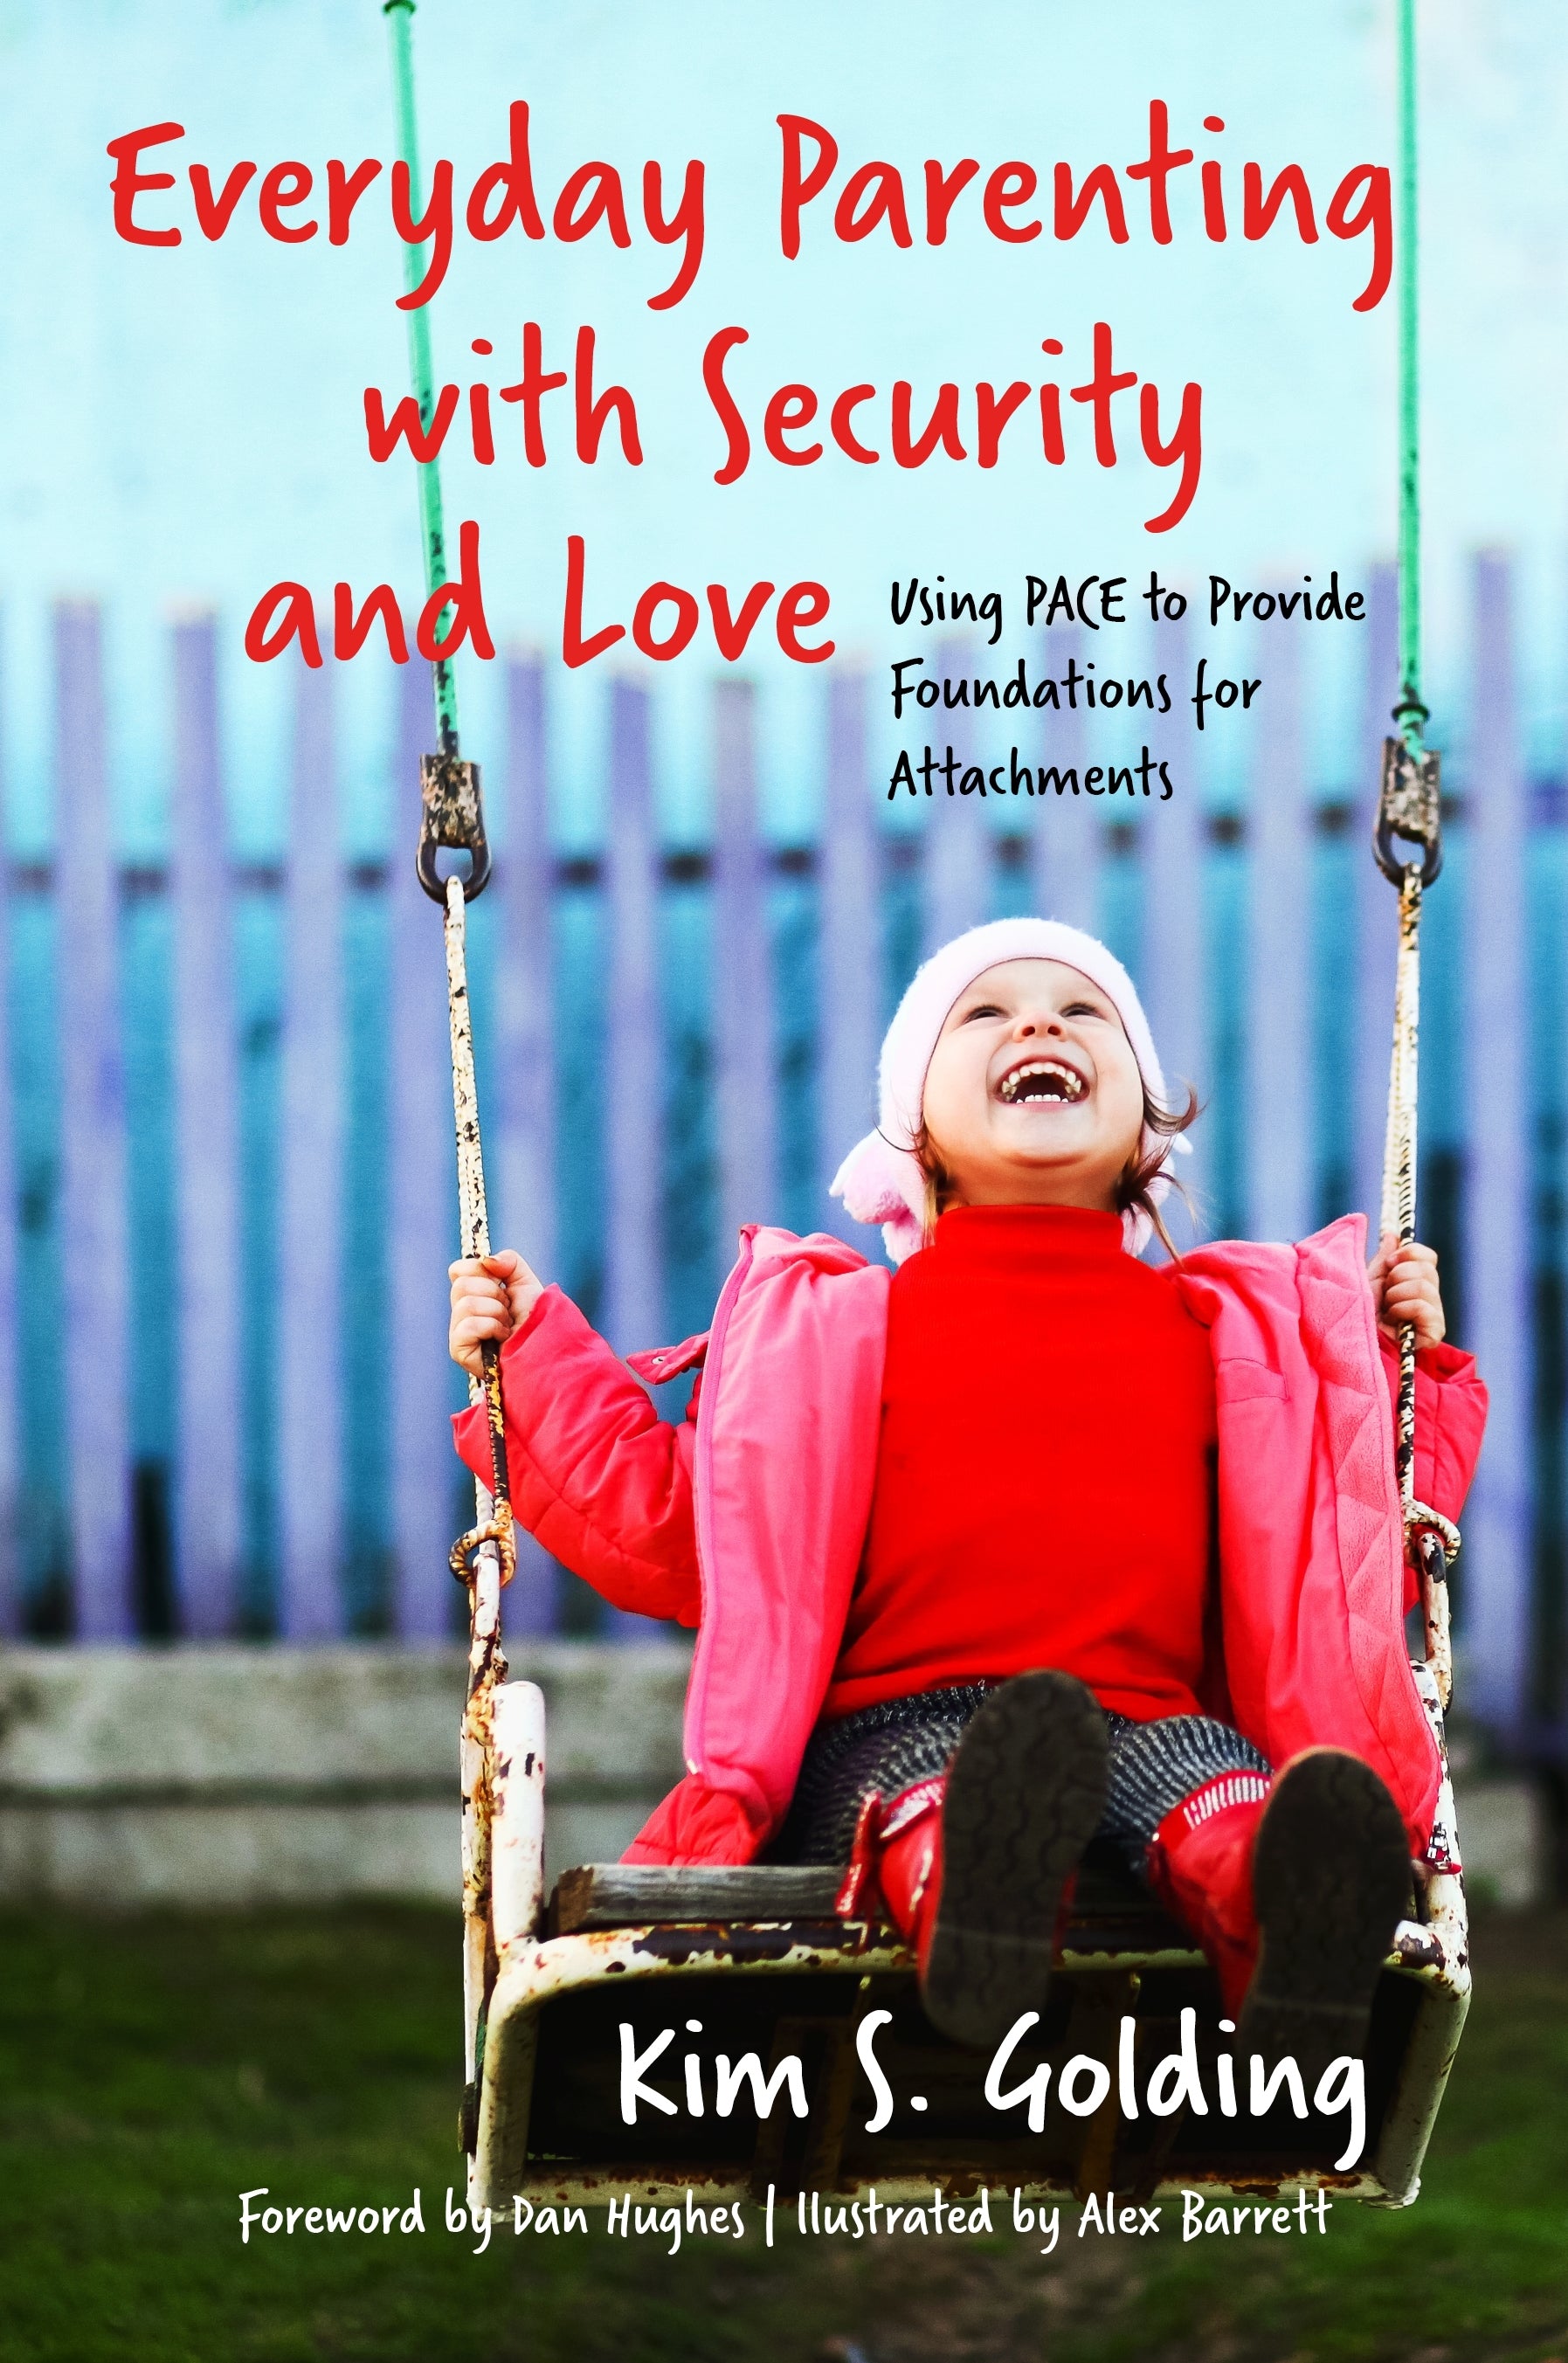 Everyday Parenting with Security and Love by Dan Hughes, Alex Barrett, Kim S. Golding